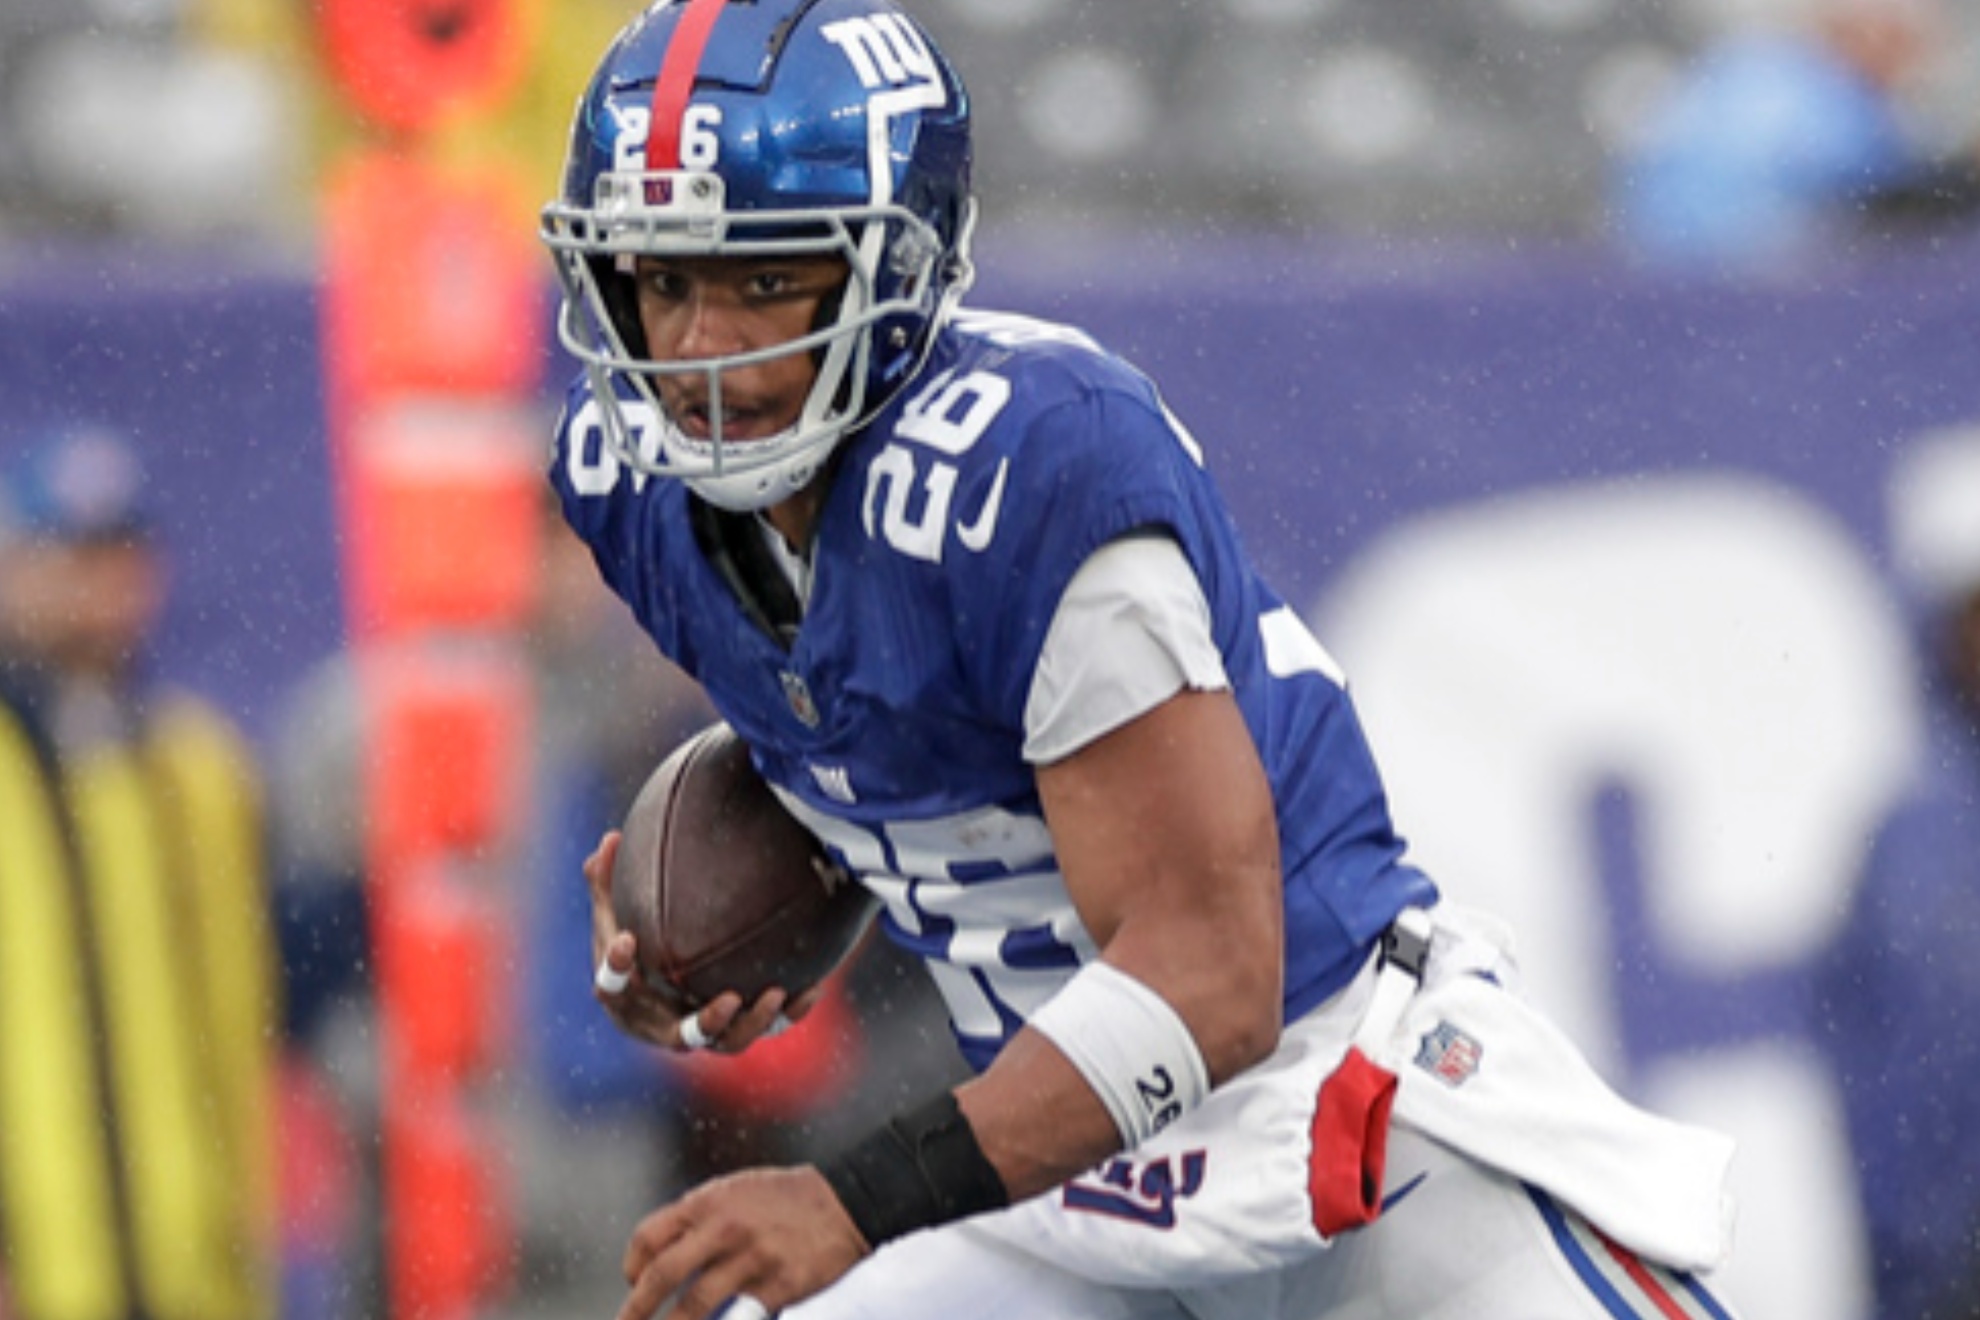 Saquon Barkley will play for the Philadelphia Eagles after 6 seasons with the Giants